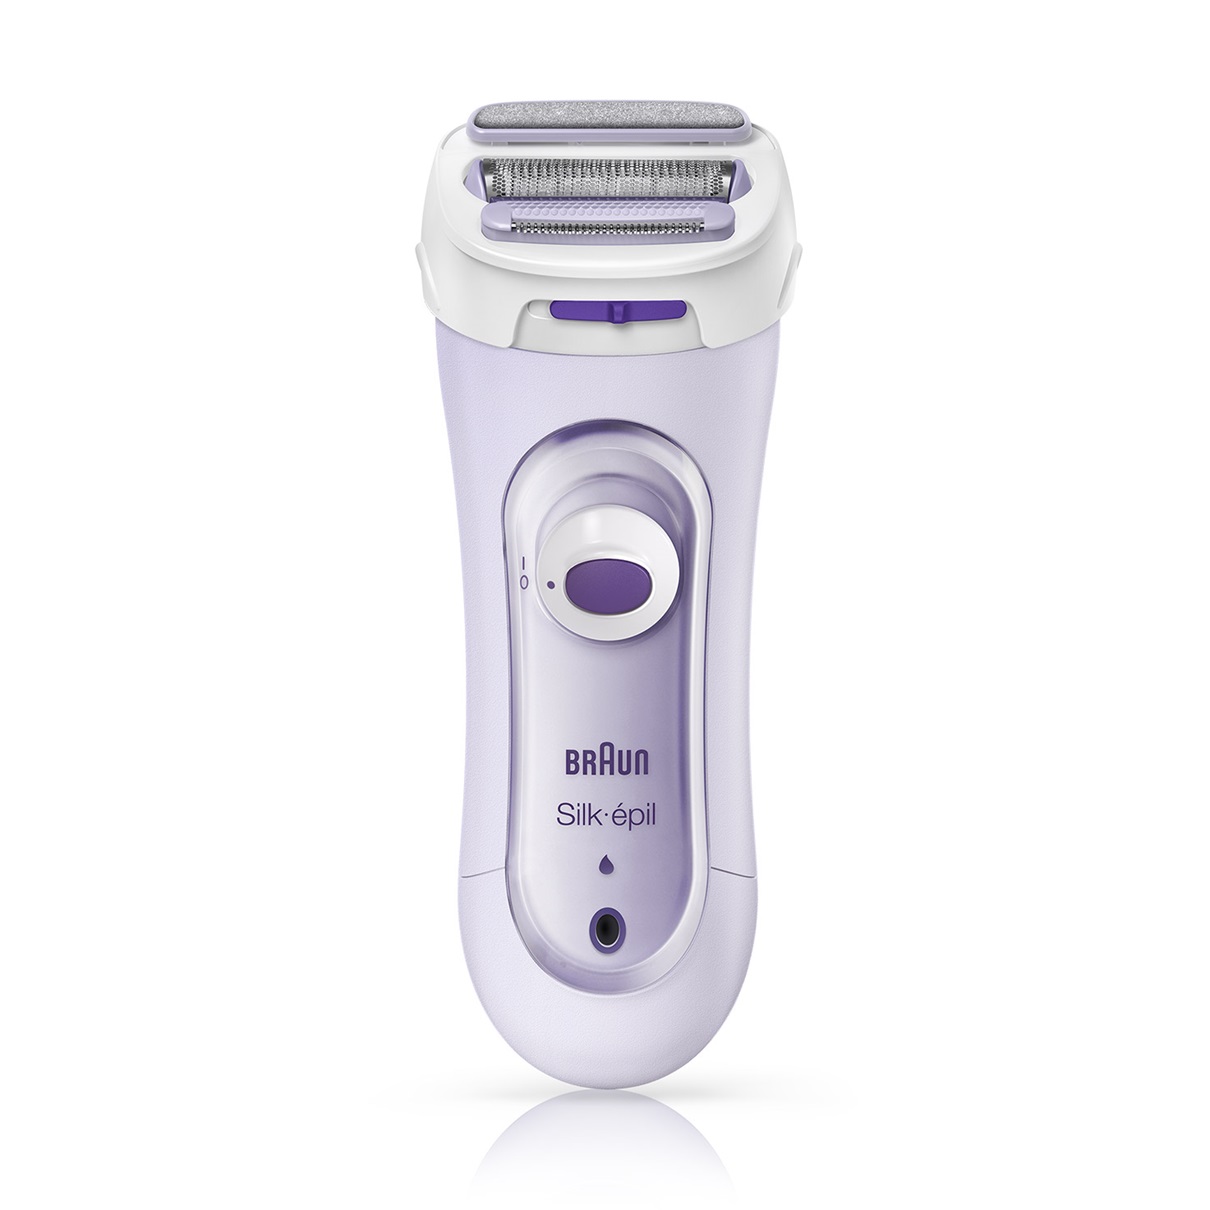 Braun Lady Shaver - 5560 Cordless Electric Shaver - side